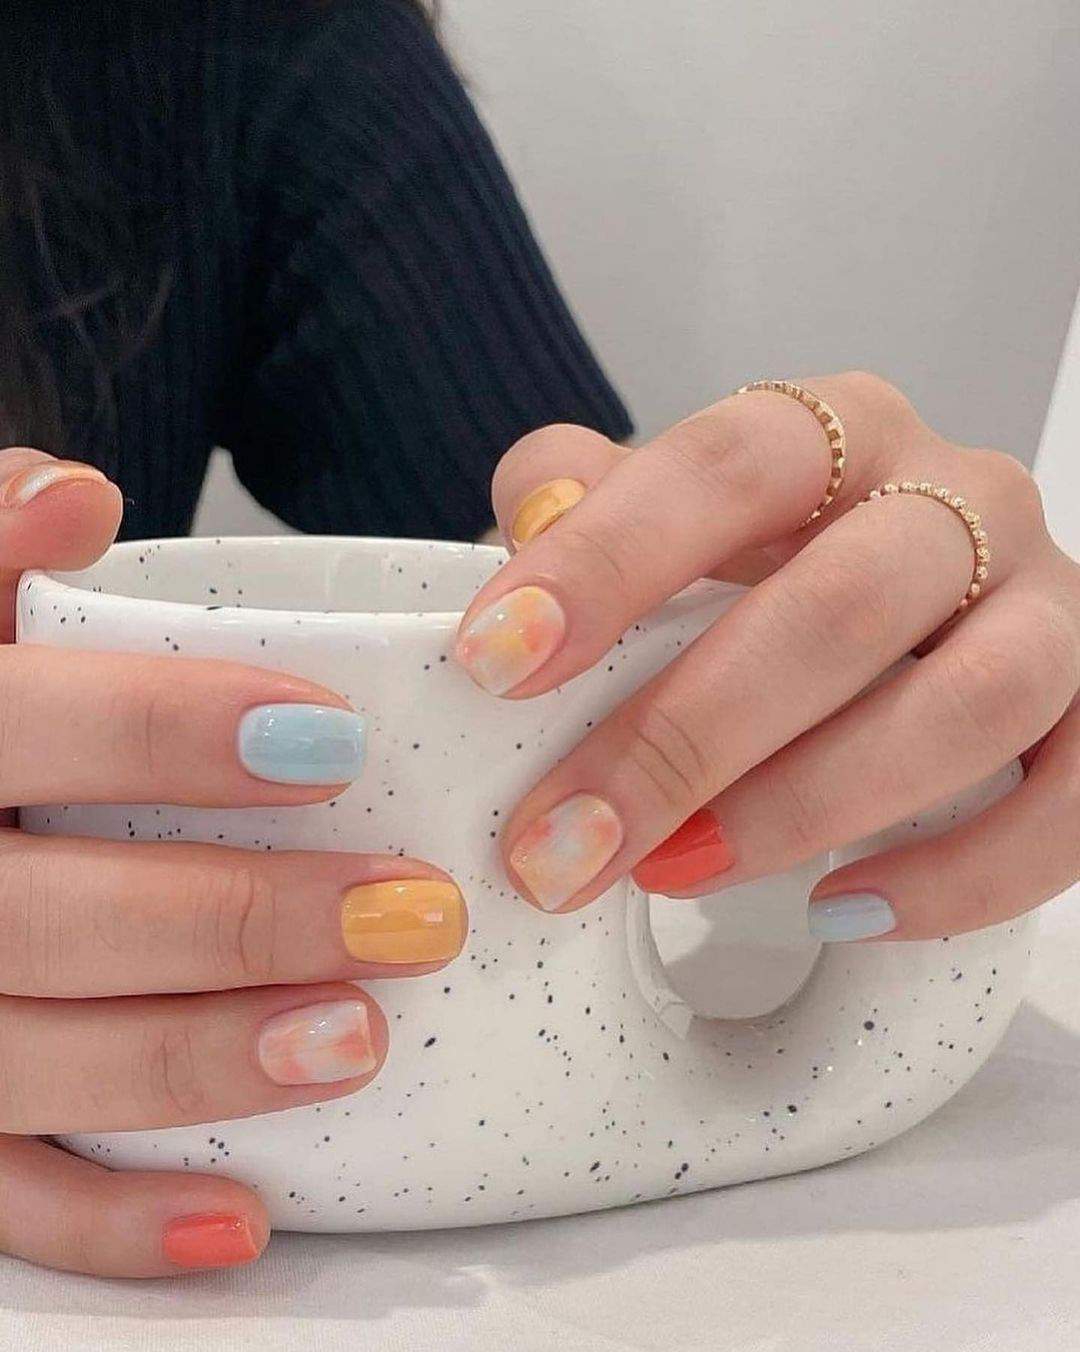 The 100+ Best Nail Designs Trends And Ideas In 2021 images 42